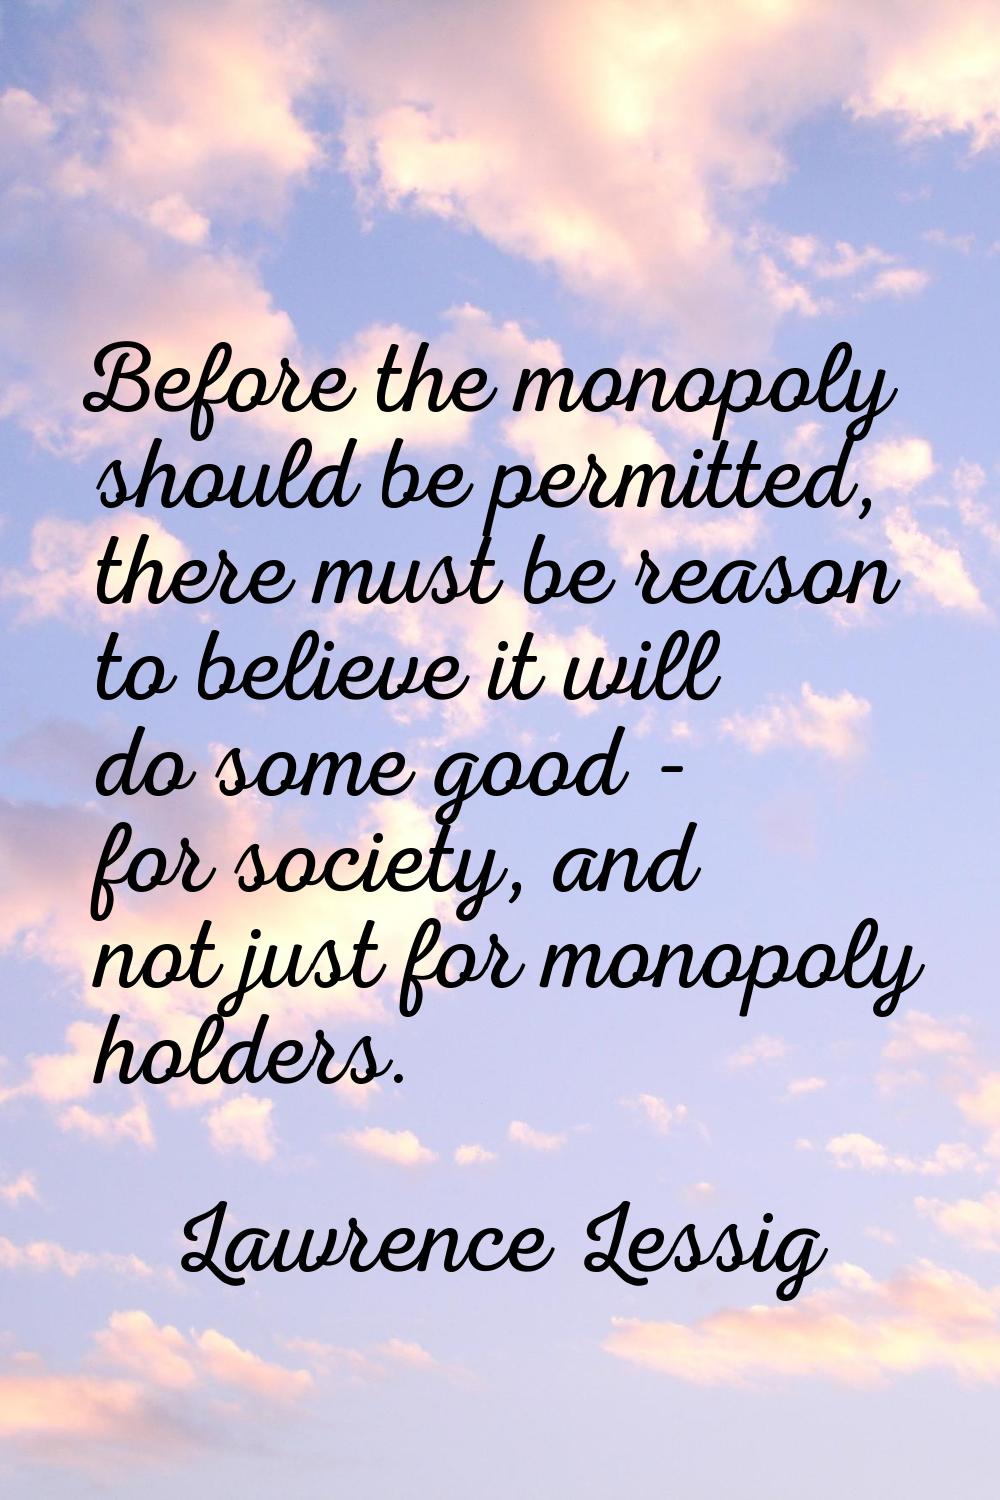 Before the monopoly should be permitted, there must be reason to believe it will do some good - for